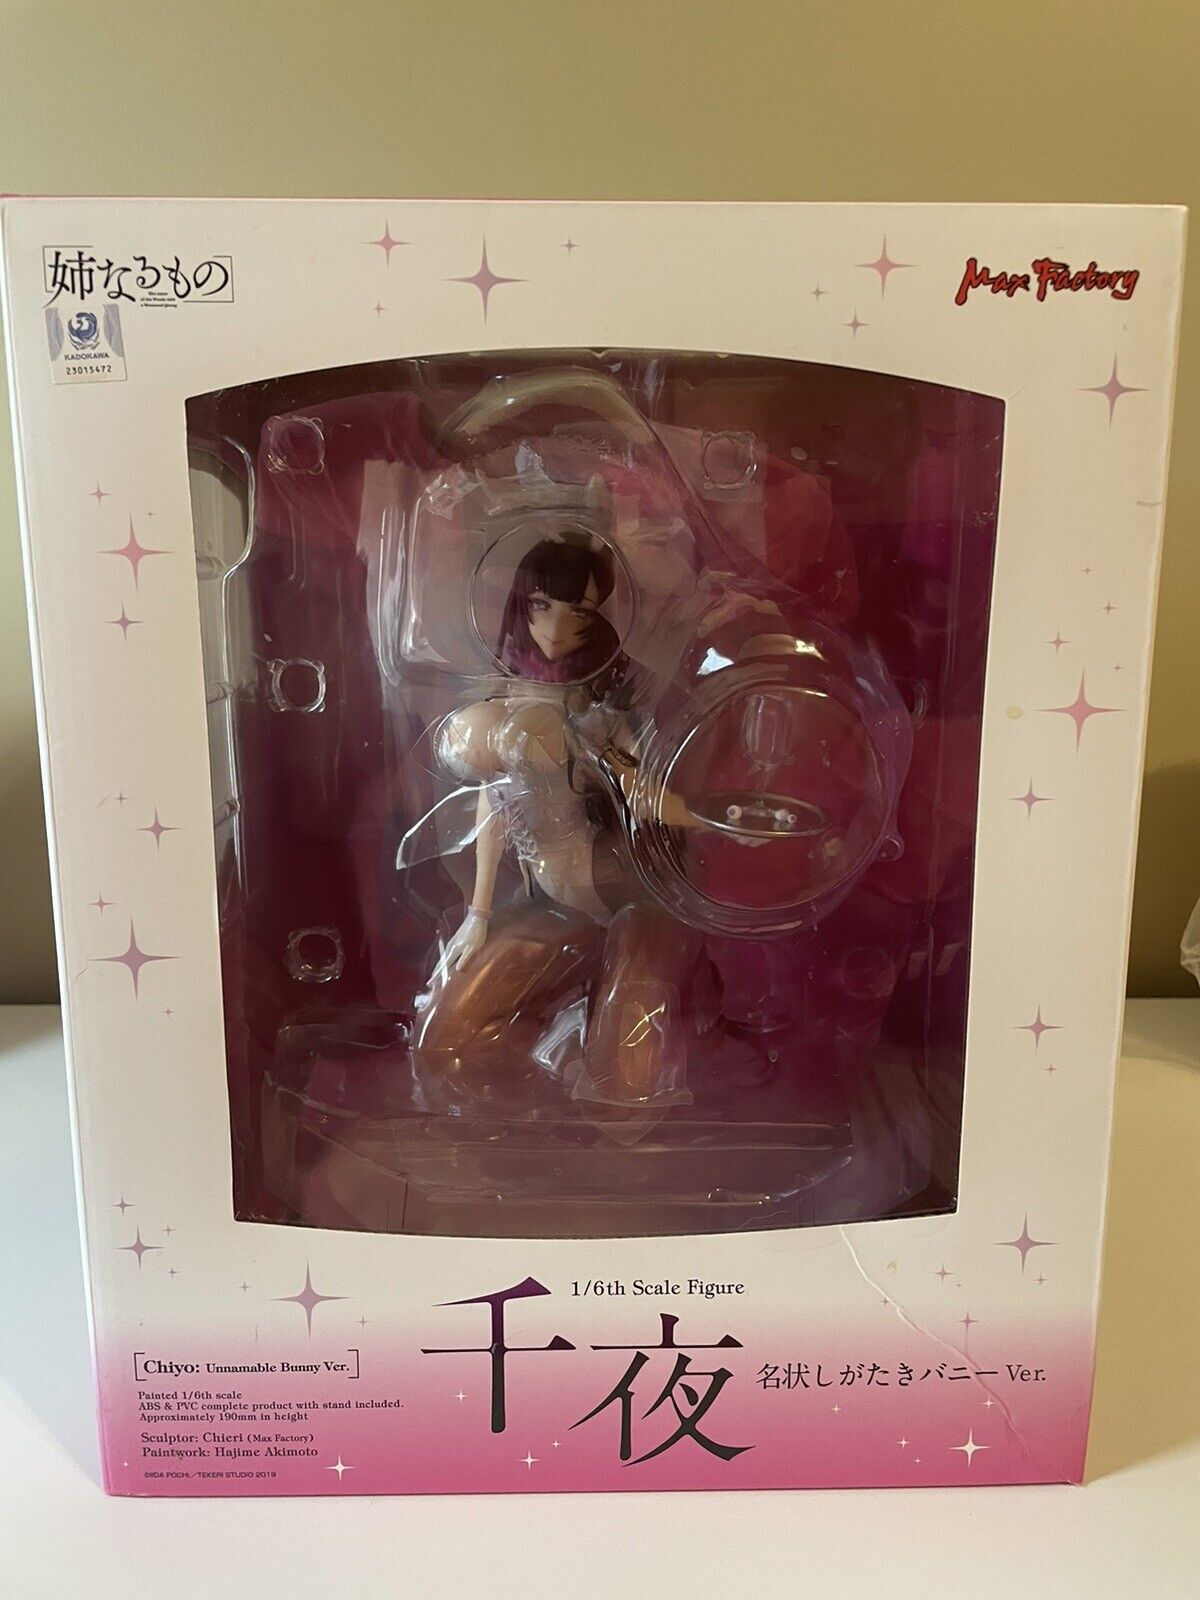 Max Factory The Elder Sister Like One Chiyo Unnamable Bunny Ver 1/6 Scale Figure